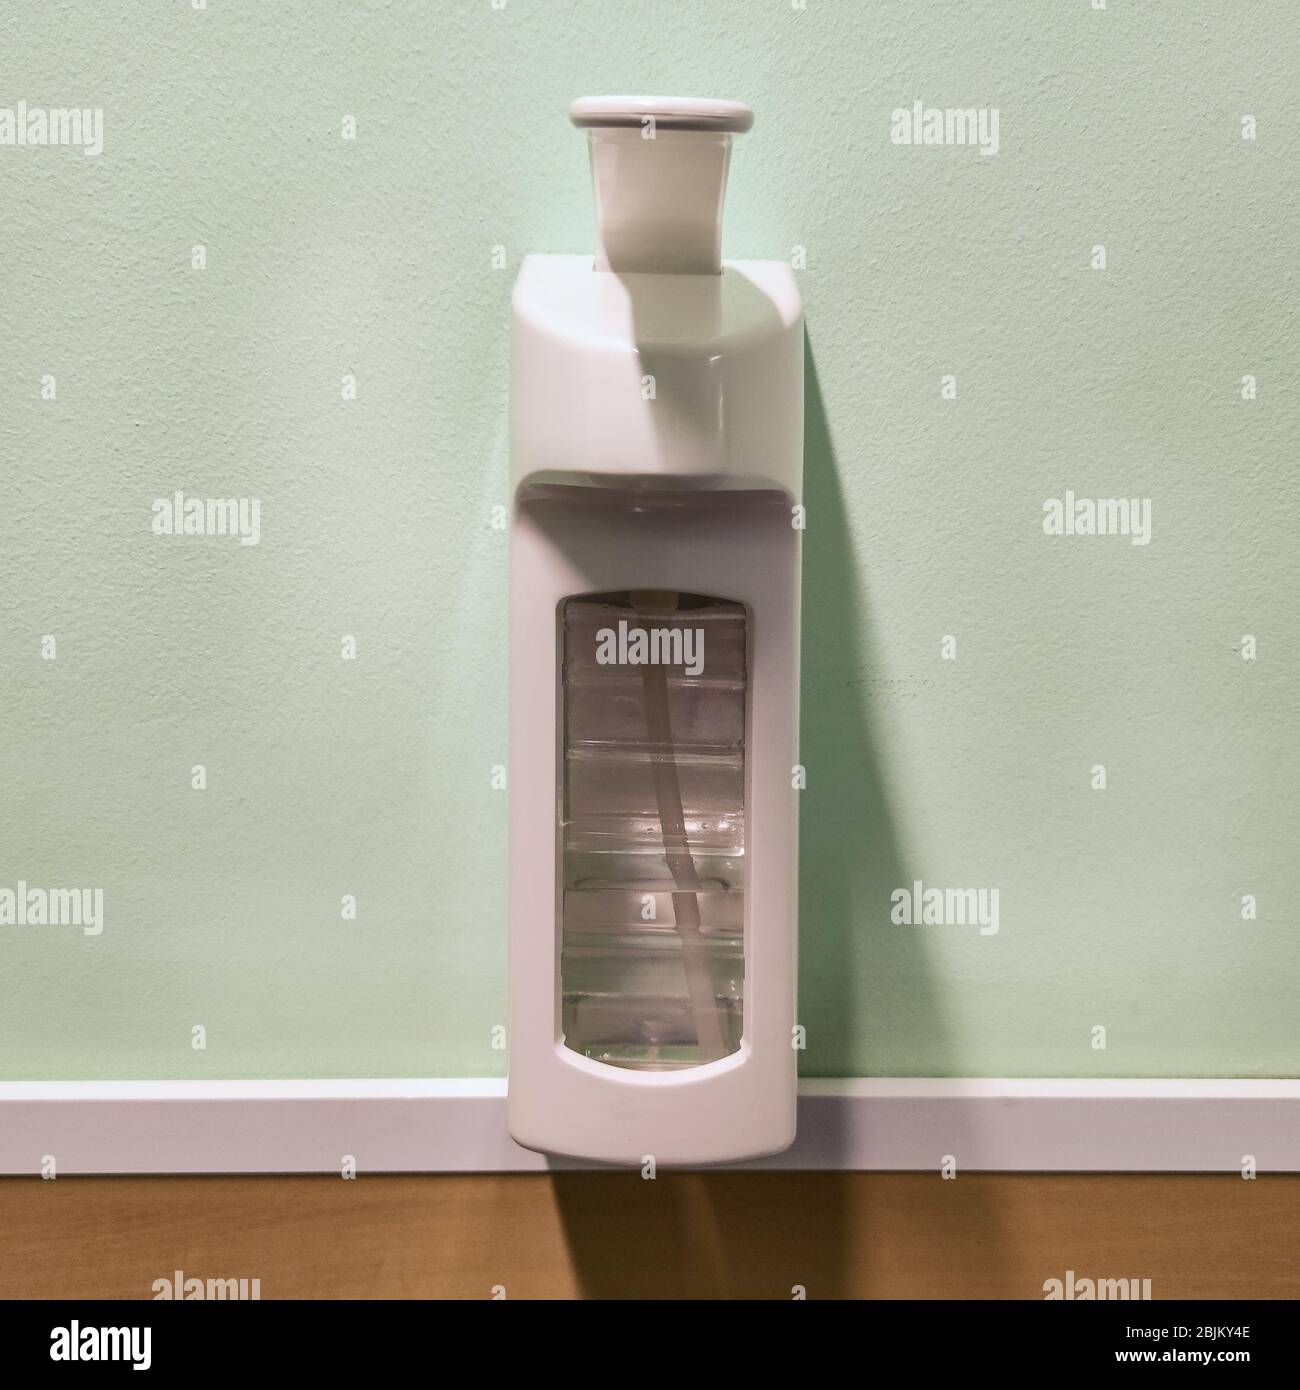 Hand sanitizer in dispenser without any brand logos on the wall. Stock Photo